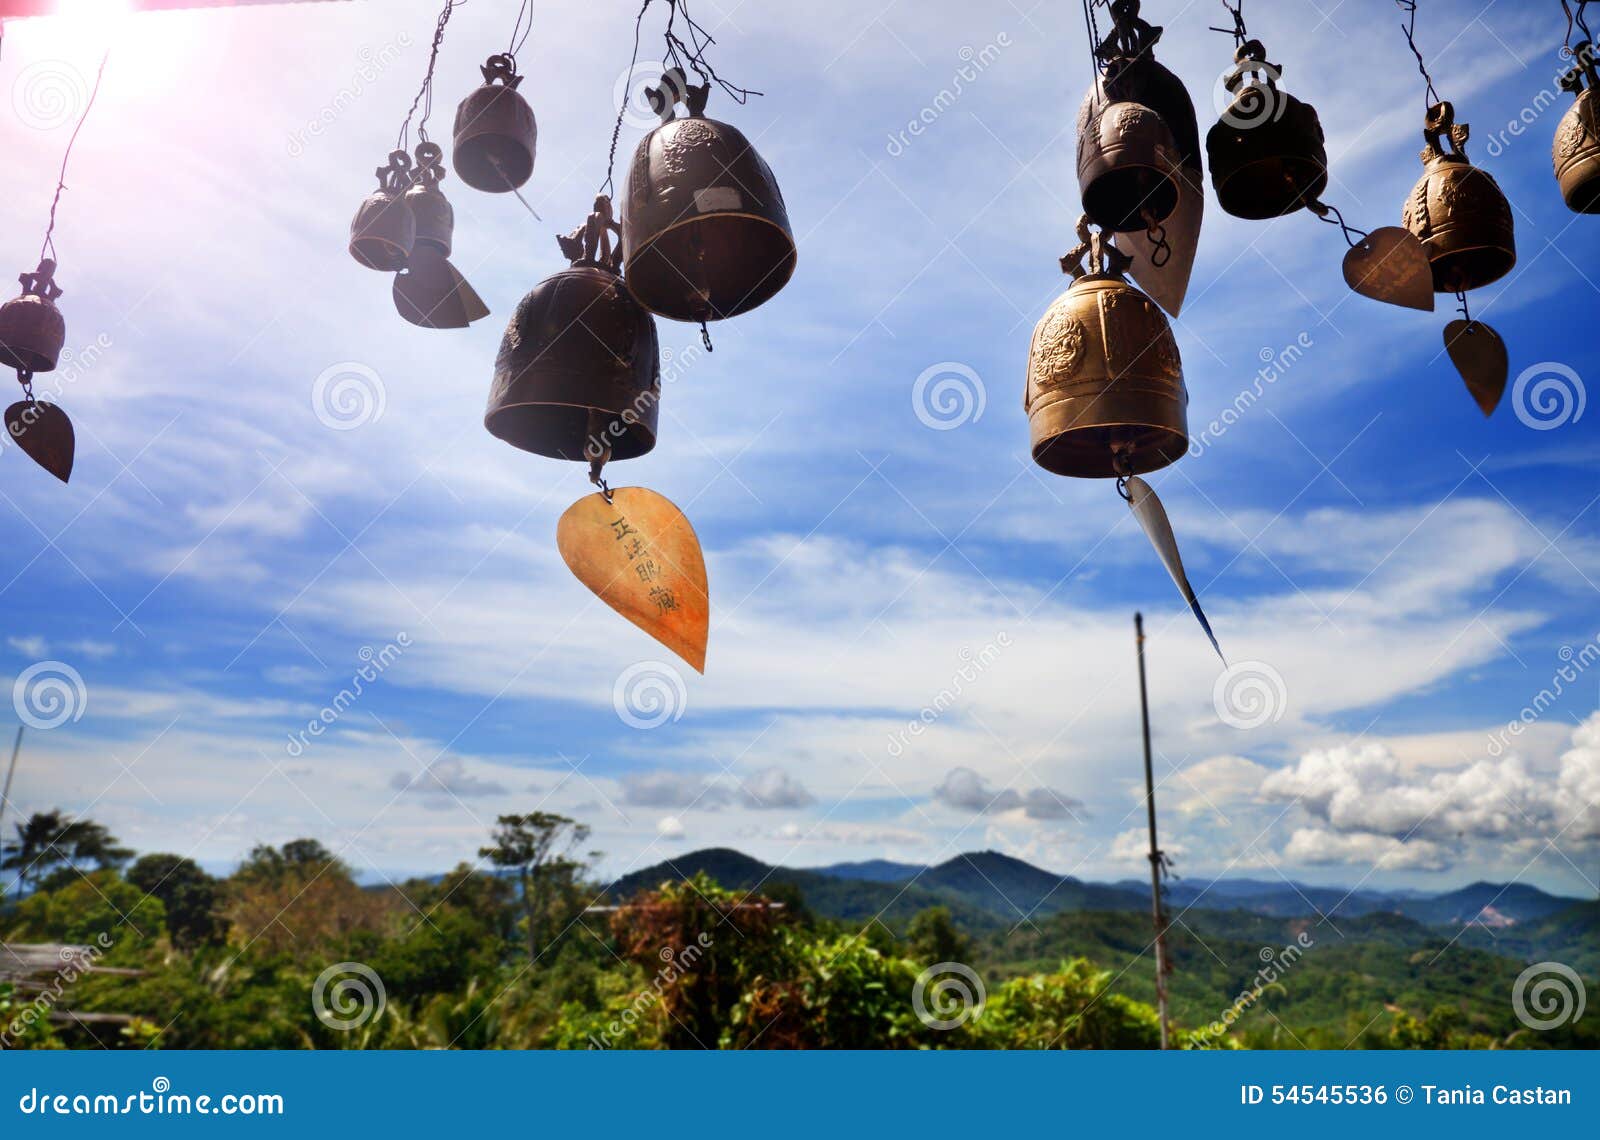 row of golden bells in buddhist temple. background of mountains in asia, tailandia